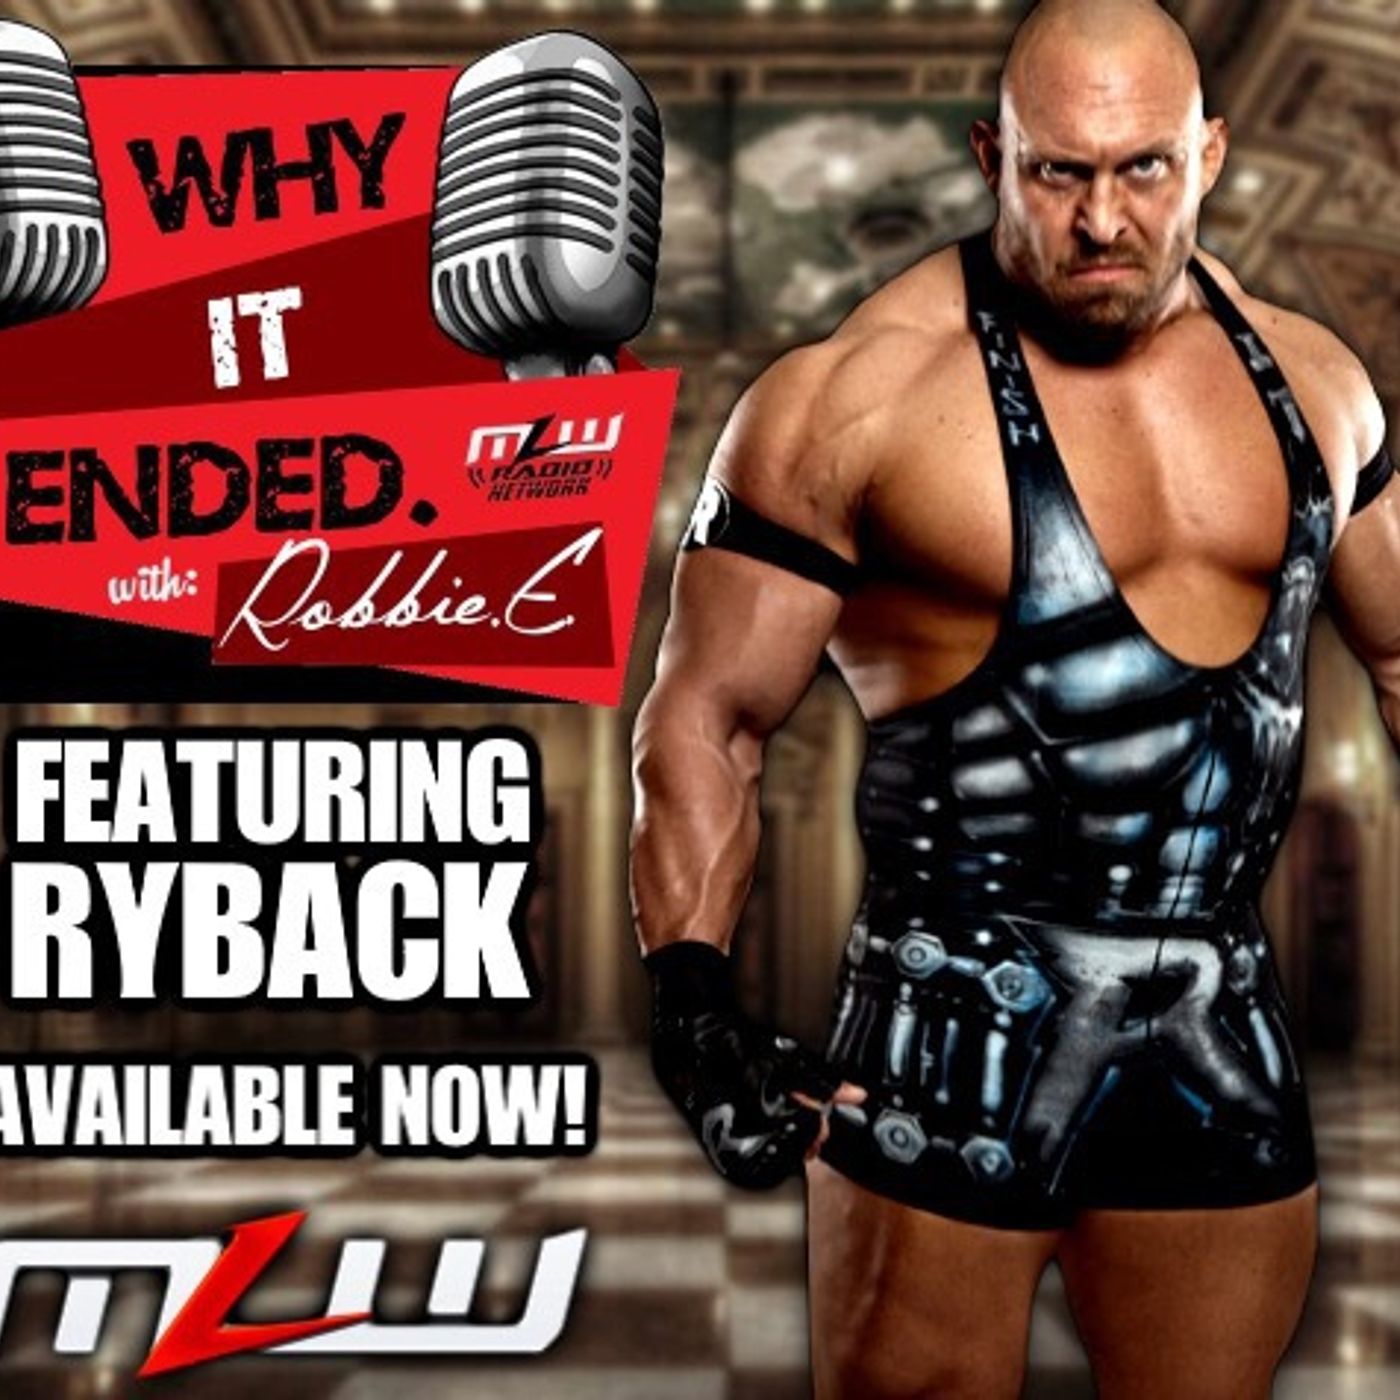 Ryback. The Big guy answers all!